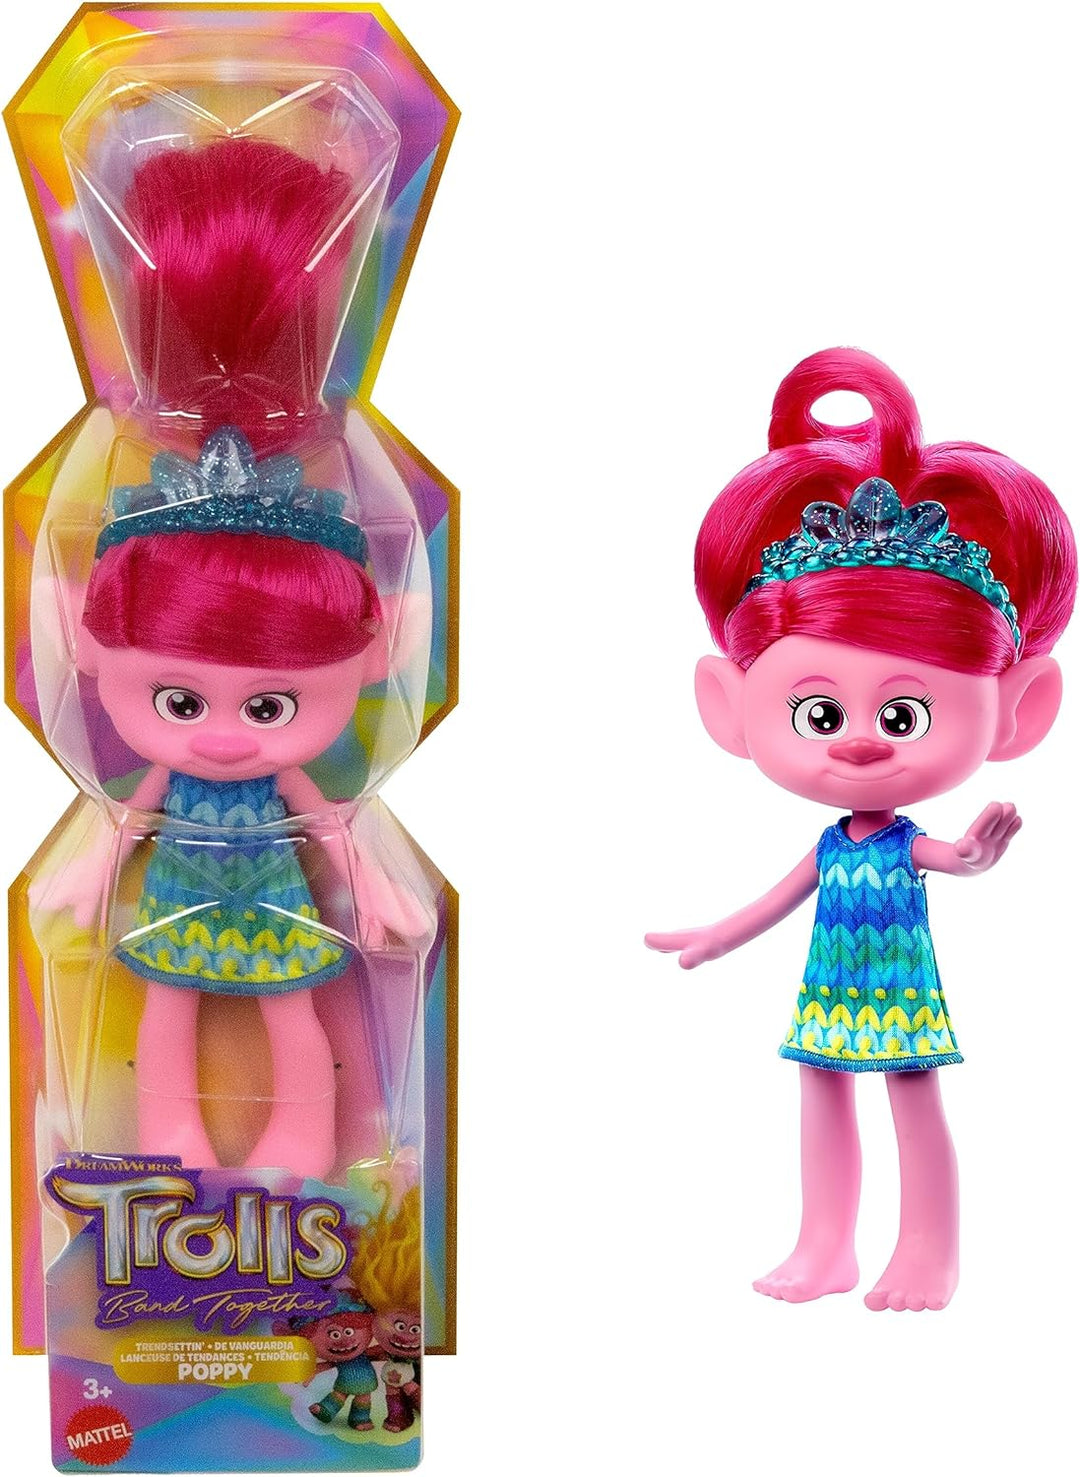 ?DreamWorks Trolls Band Together Trendsettin’ Fashion Doll, Queen Poppy with Vibrant Hair & Accessory